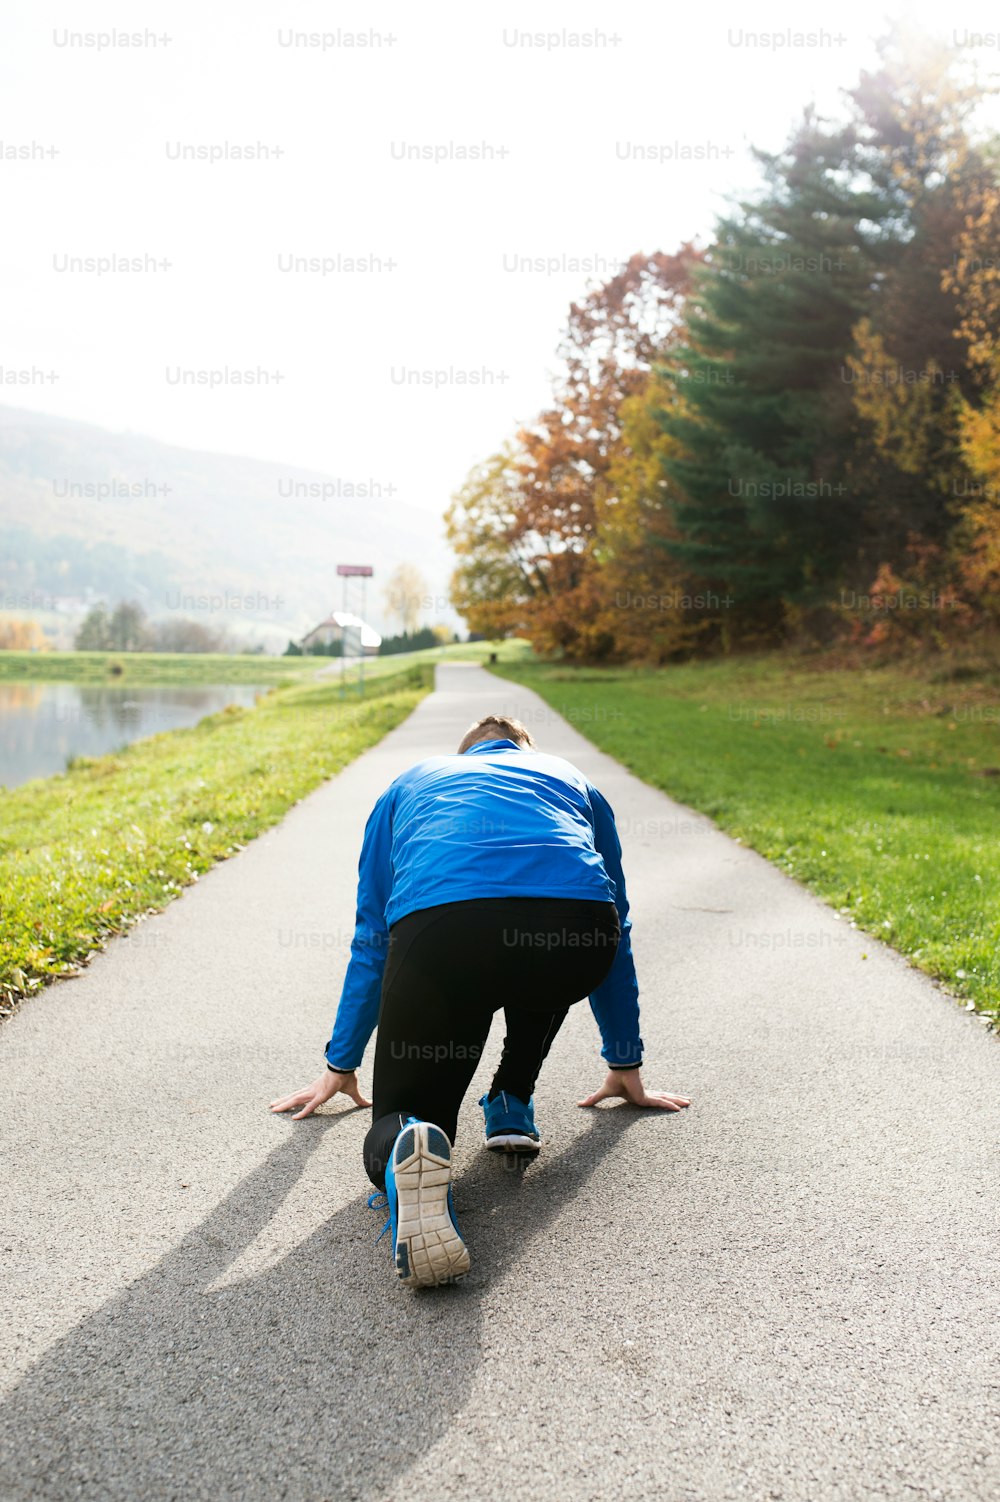 Young runner in blue jacket on an asphalt path leading through green grass in steady position. Trail runner training for cross country running outside in colorful sunny autumn nature.